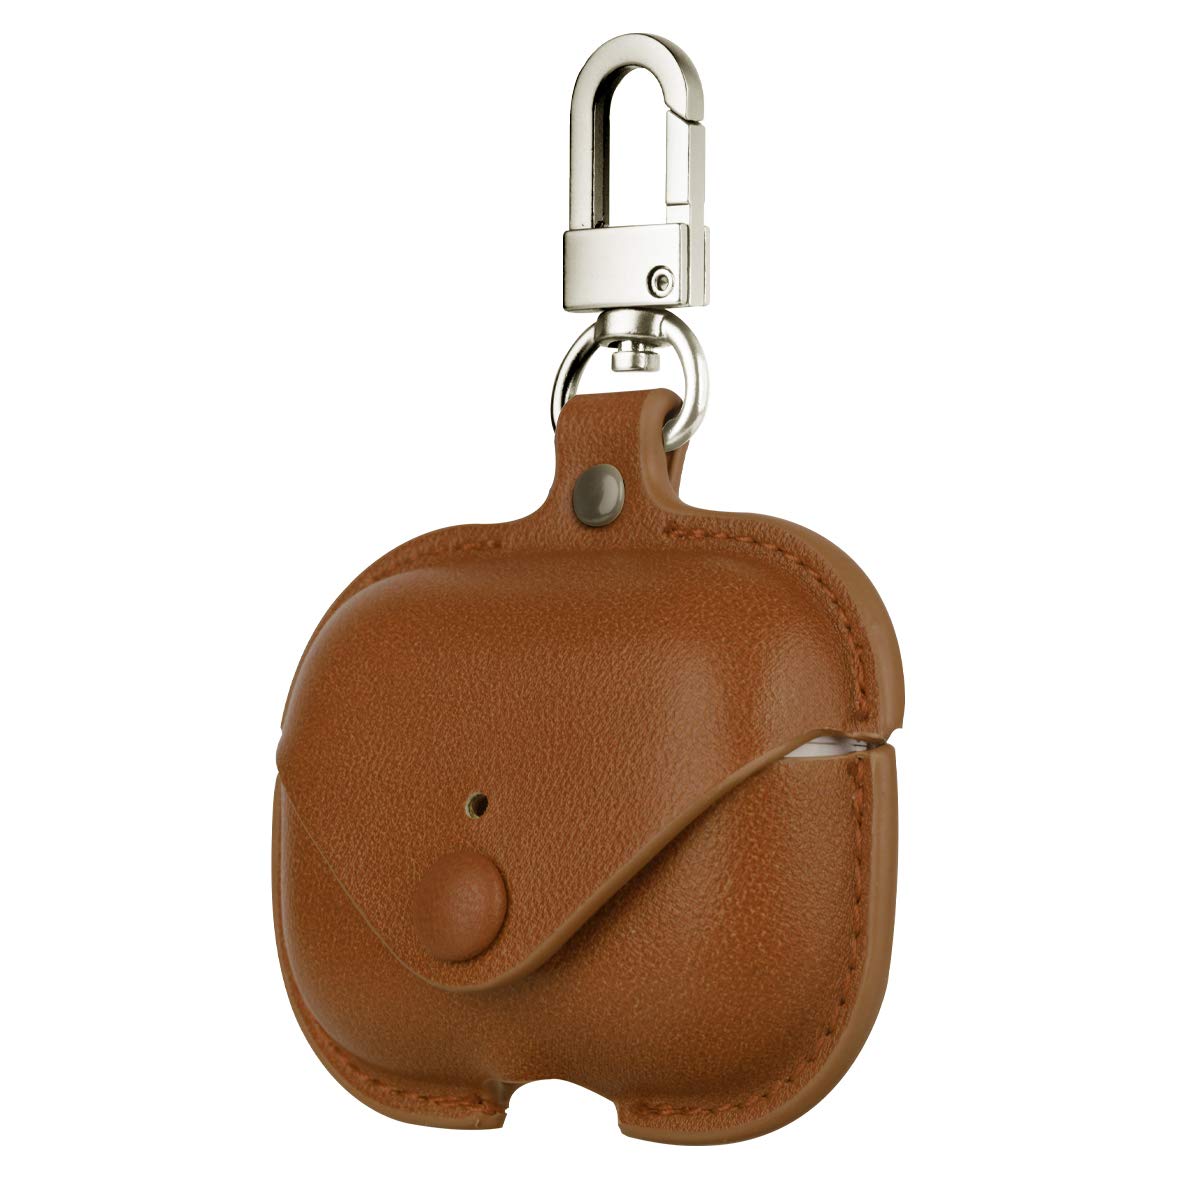 LiKGUS Soft Case for Airpods Pro Accessories Key Luxury Leather Storage Bag Earphone Cover with Keychain Charging Case (Airpod Not Included) (Brown)